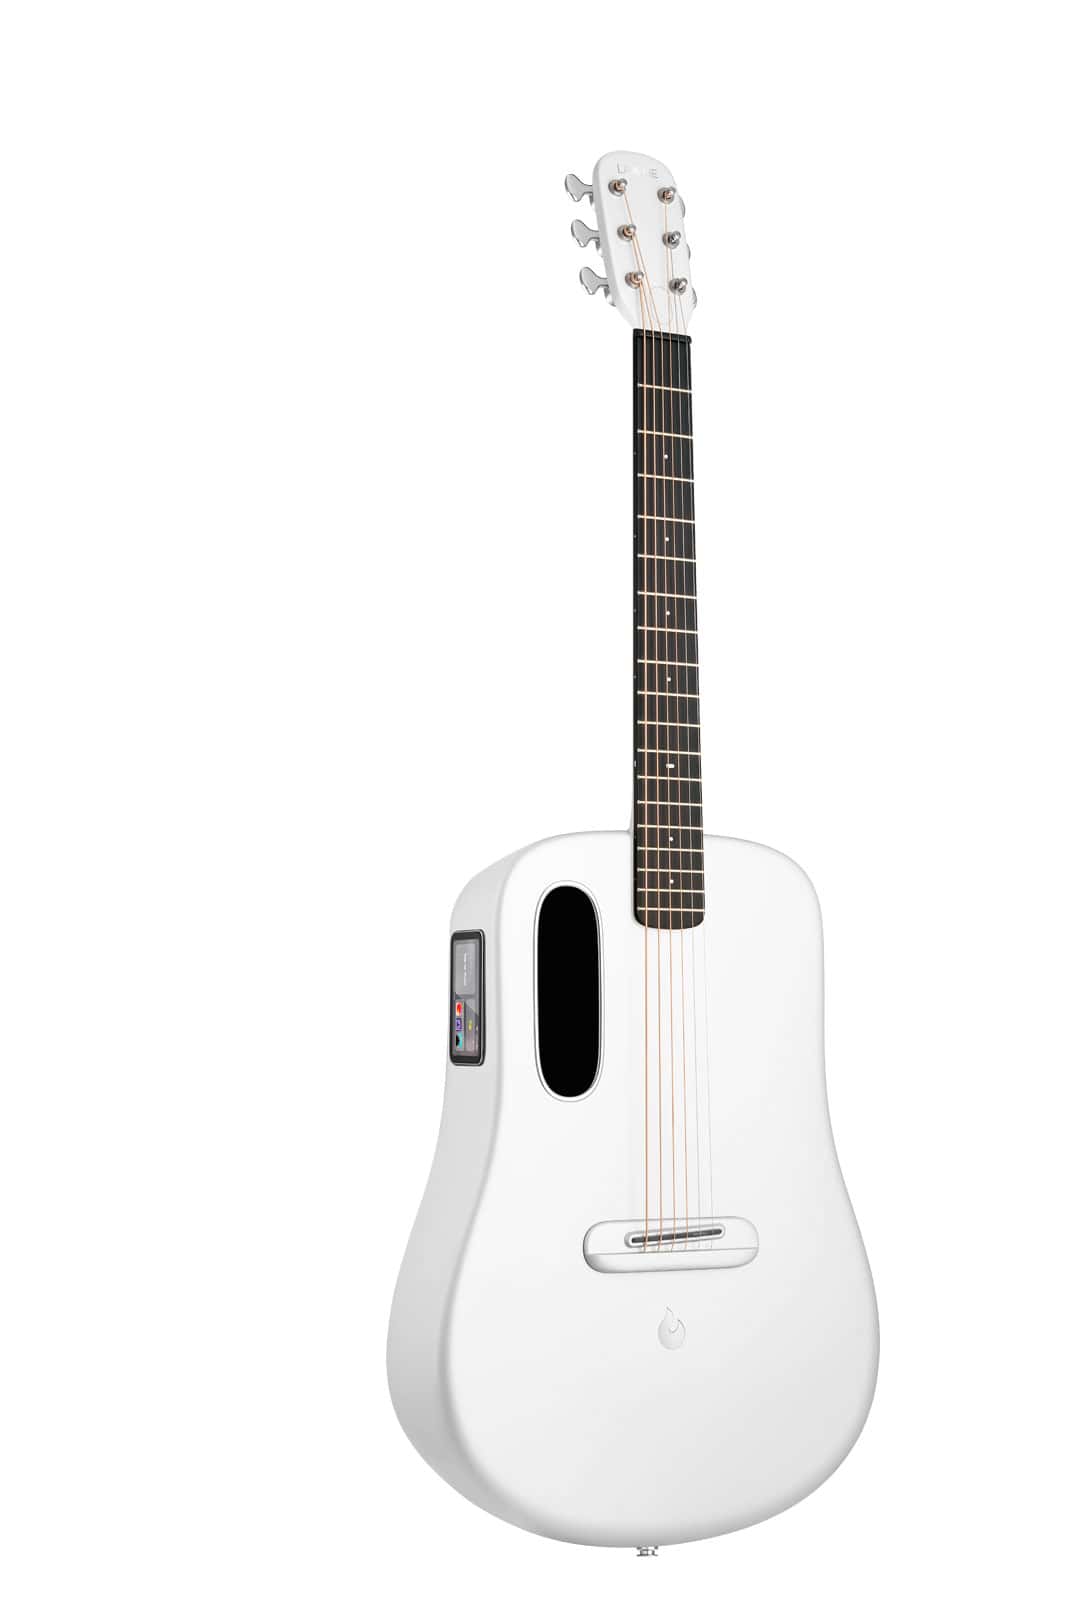 LAVA MUSIC LAVA ME 4 CARBON SERIES 36'' WHITE - WITH SPACE BAG